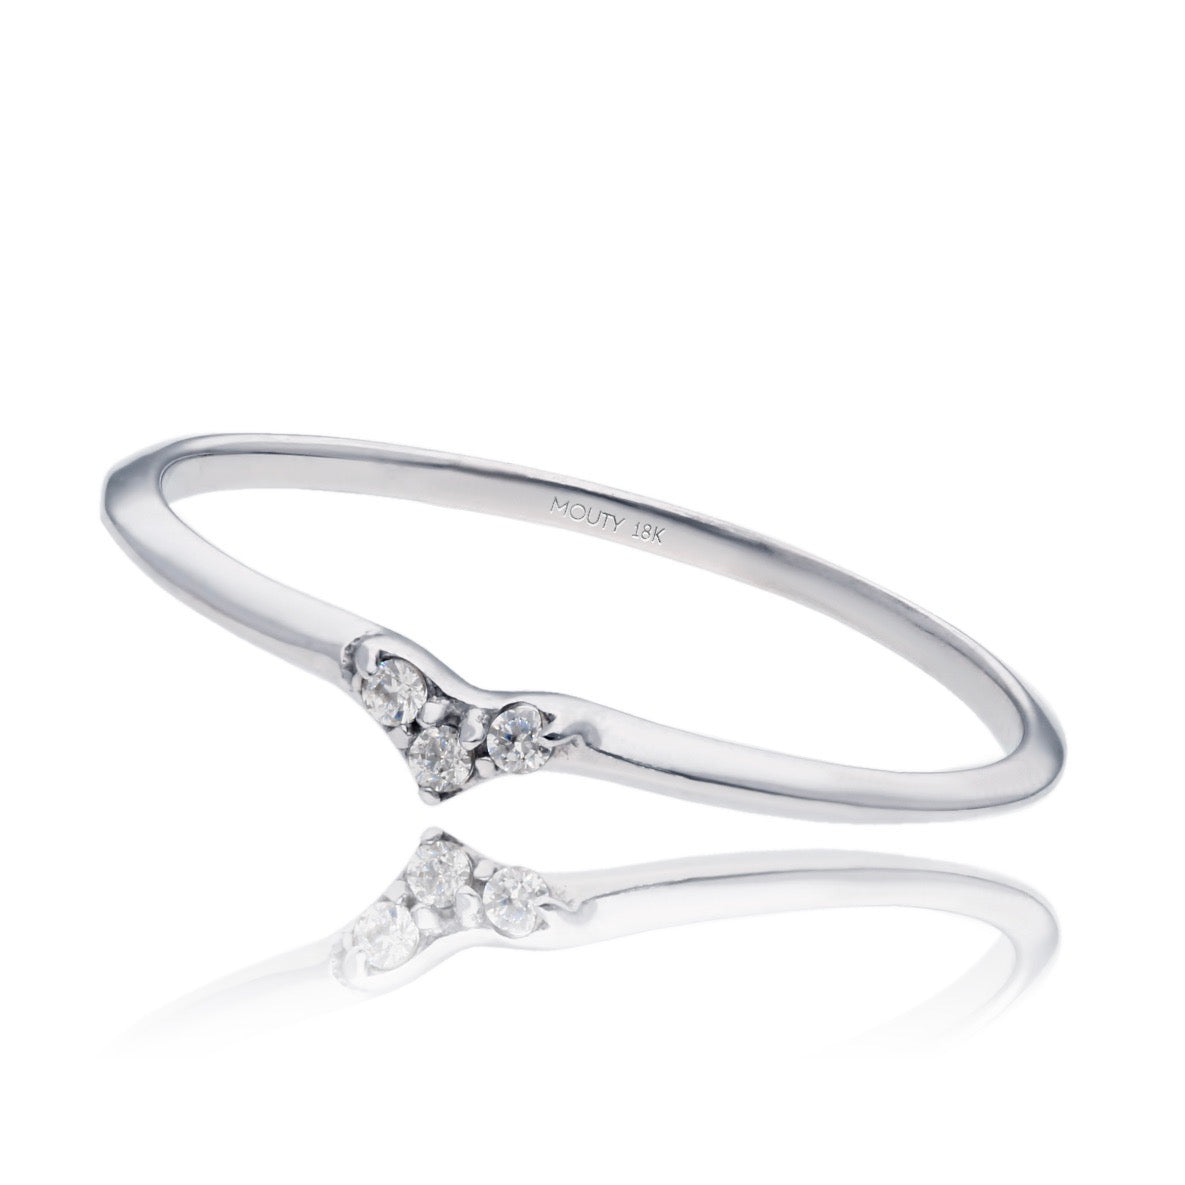 Angeline Ring in 18k White Gold with Zirconias